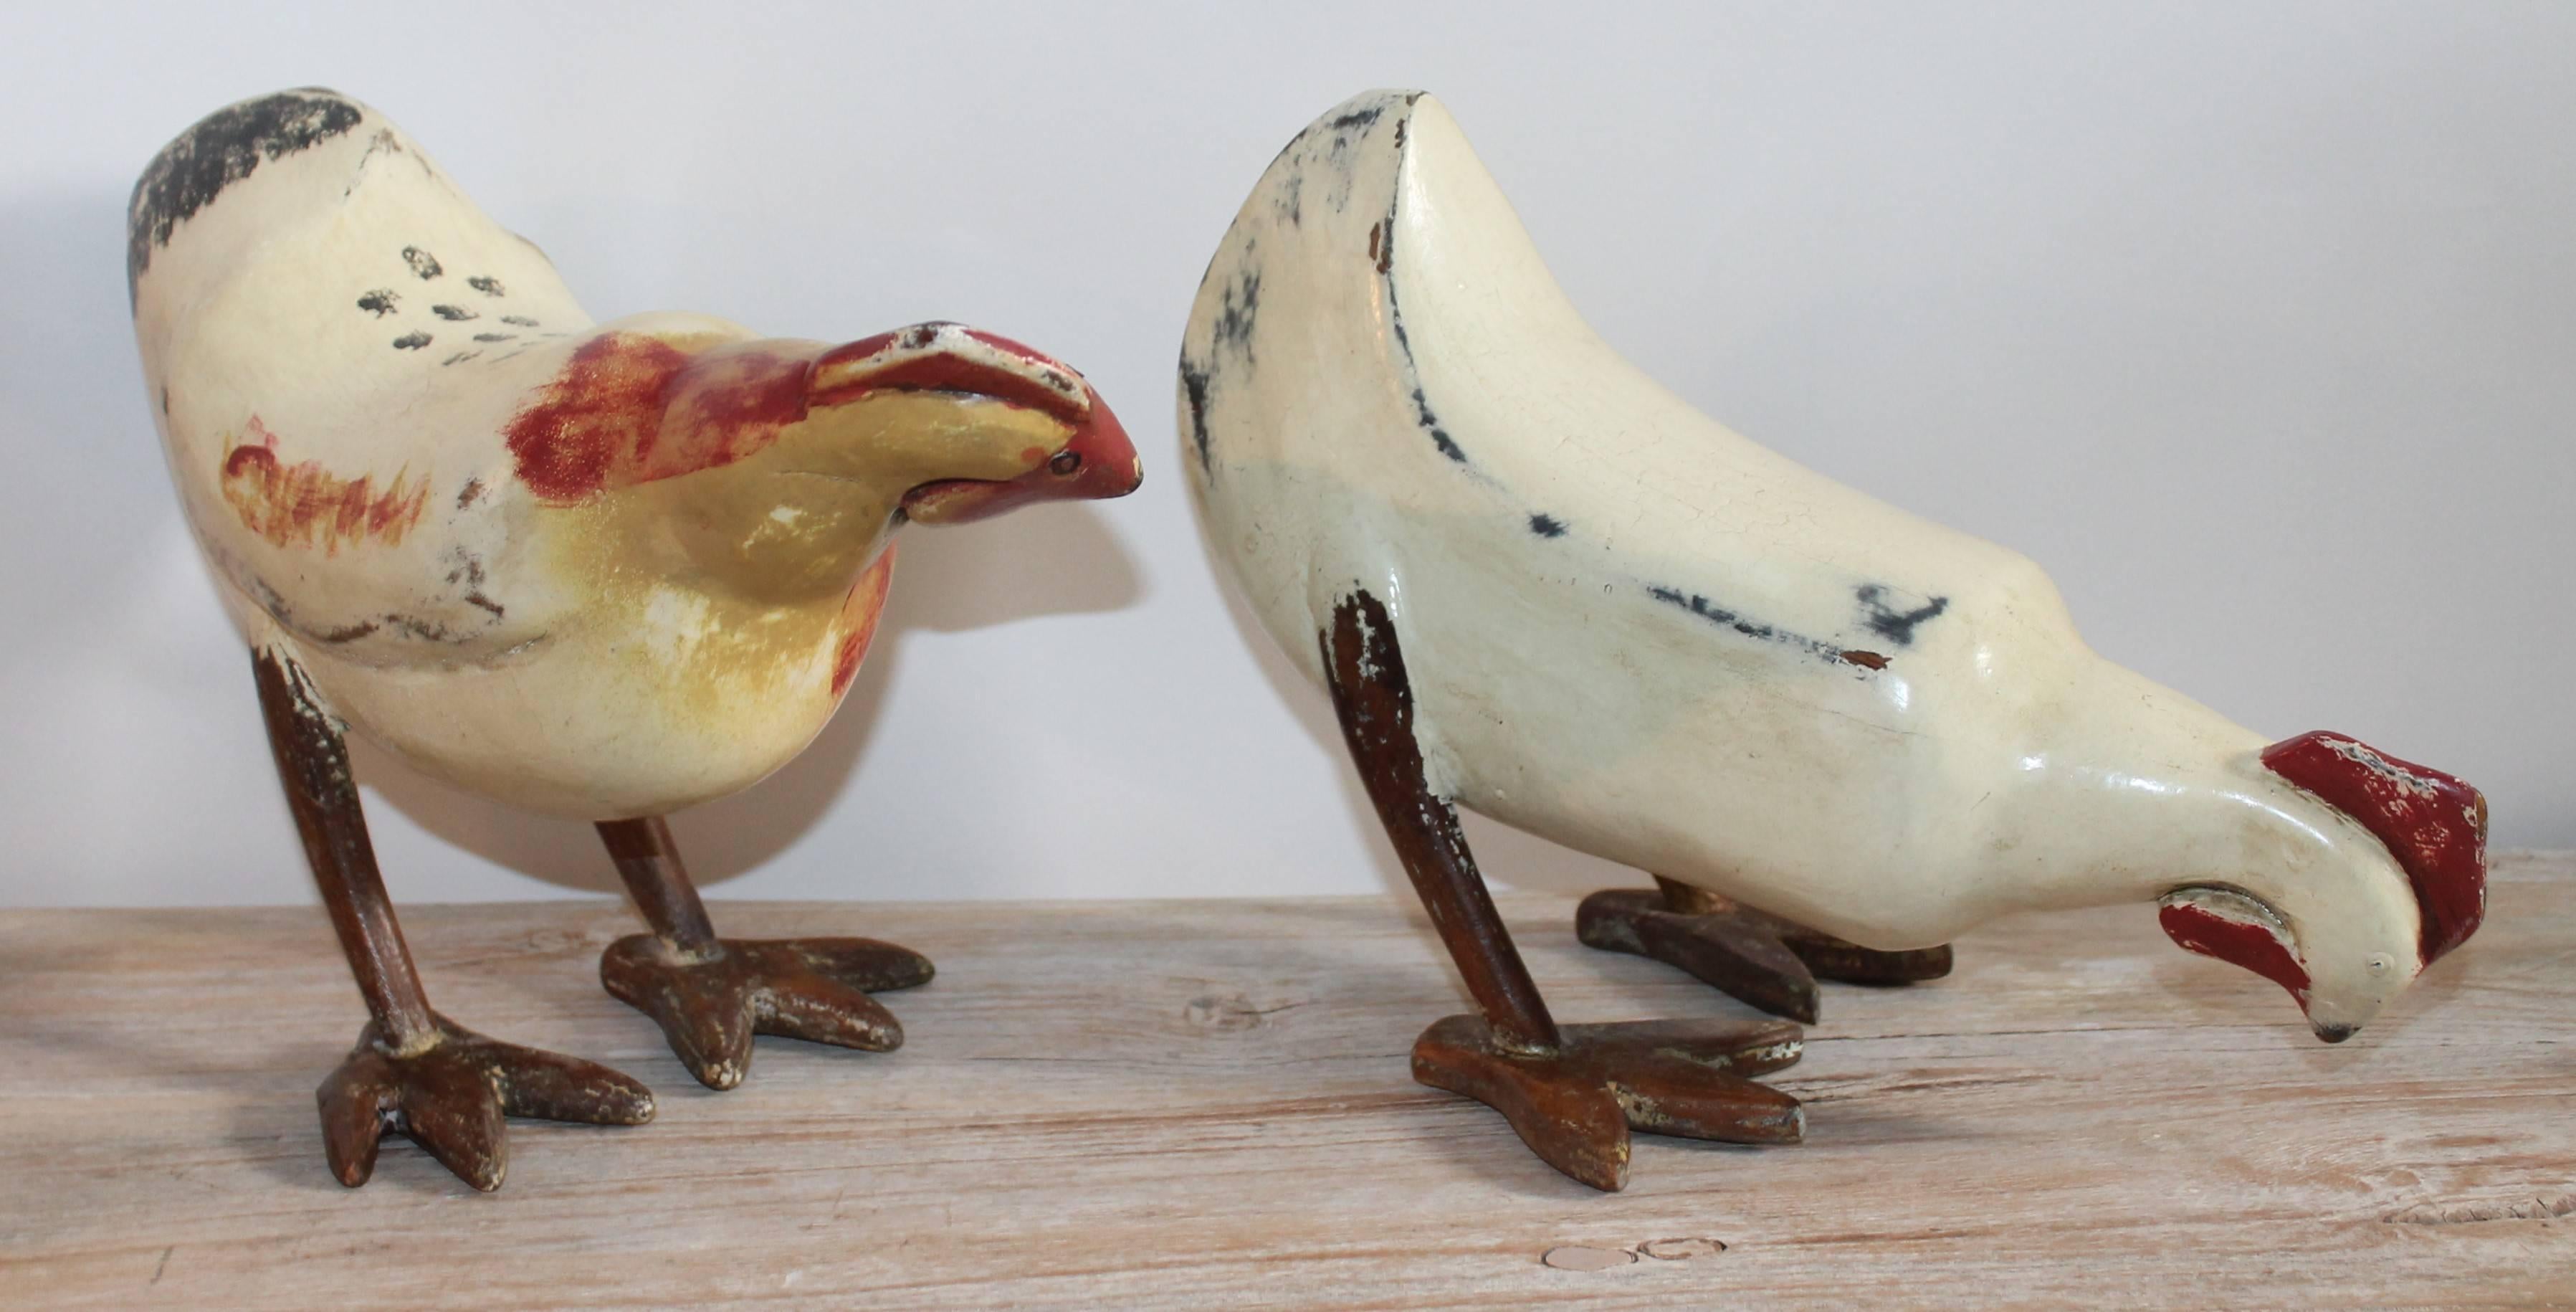 These fun vintage painted chickens are in good condition. They are late but so great.
Chicken pecking size:
12 long x 9 high x 7 wide
Side looking chicken
12 long x 9 high x 6 wide.